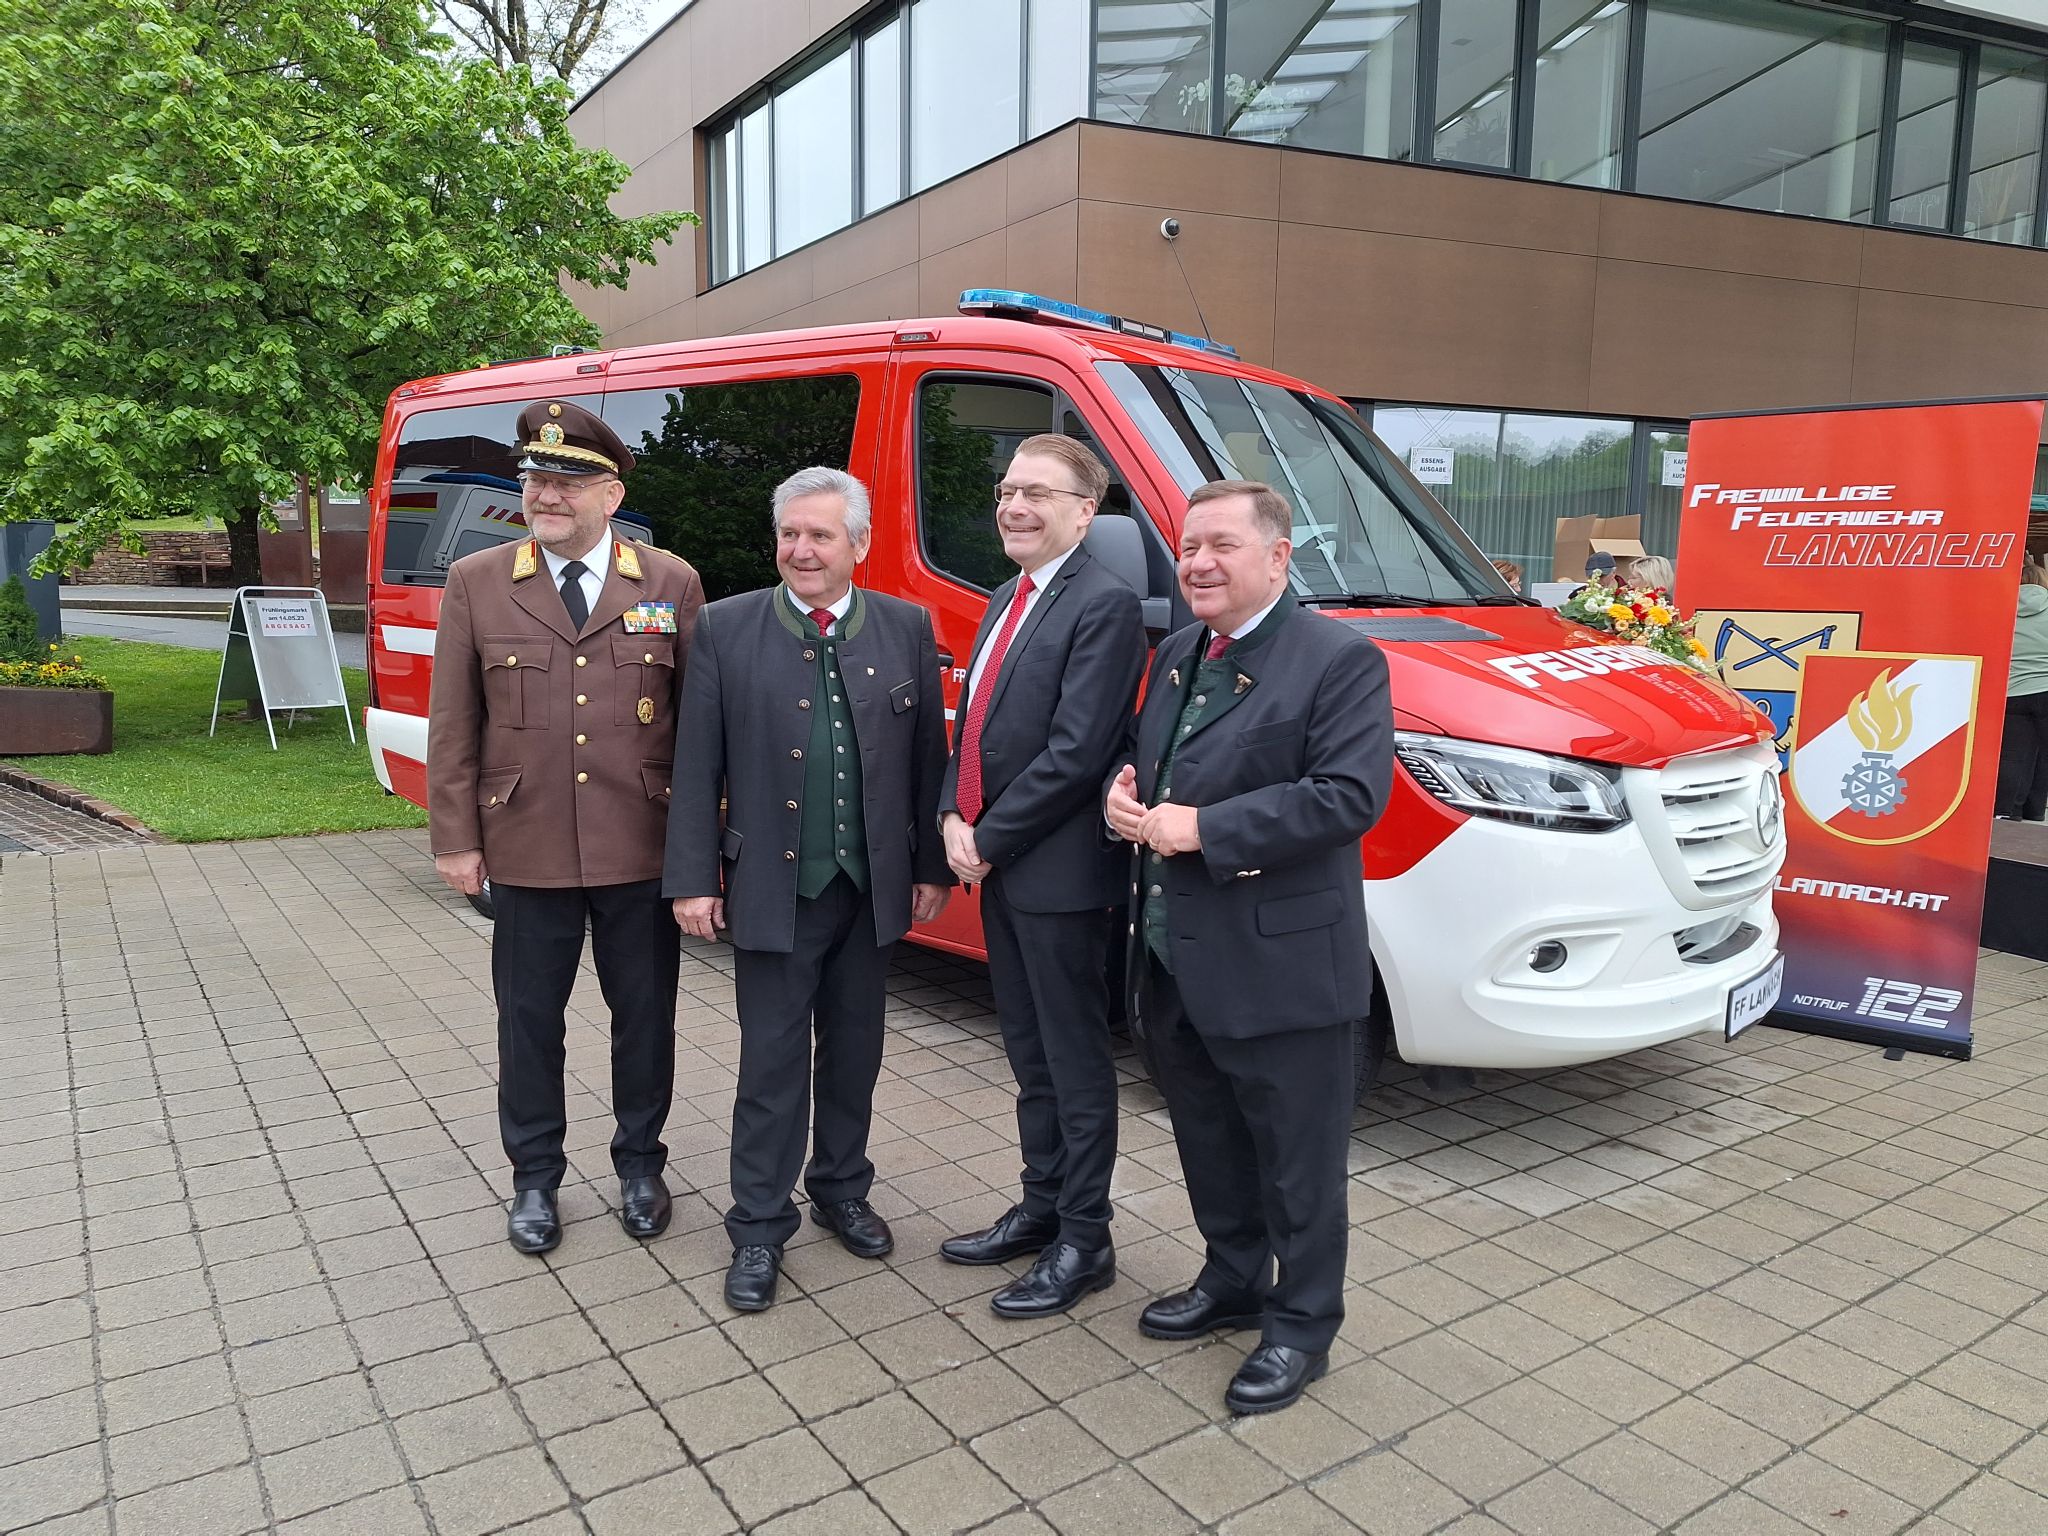 IOI President and Minister Werner Amon at the blessing of a fire engine.